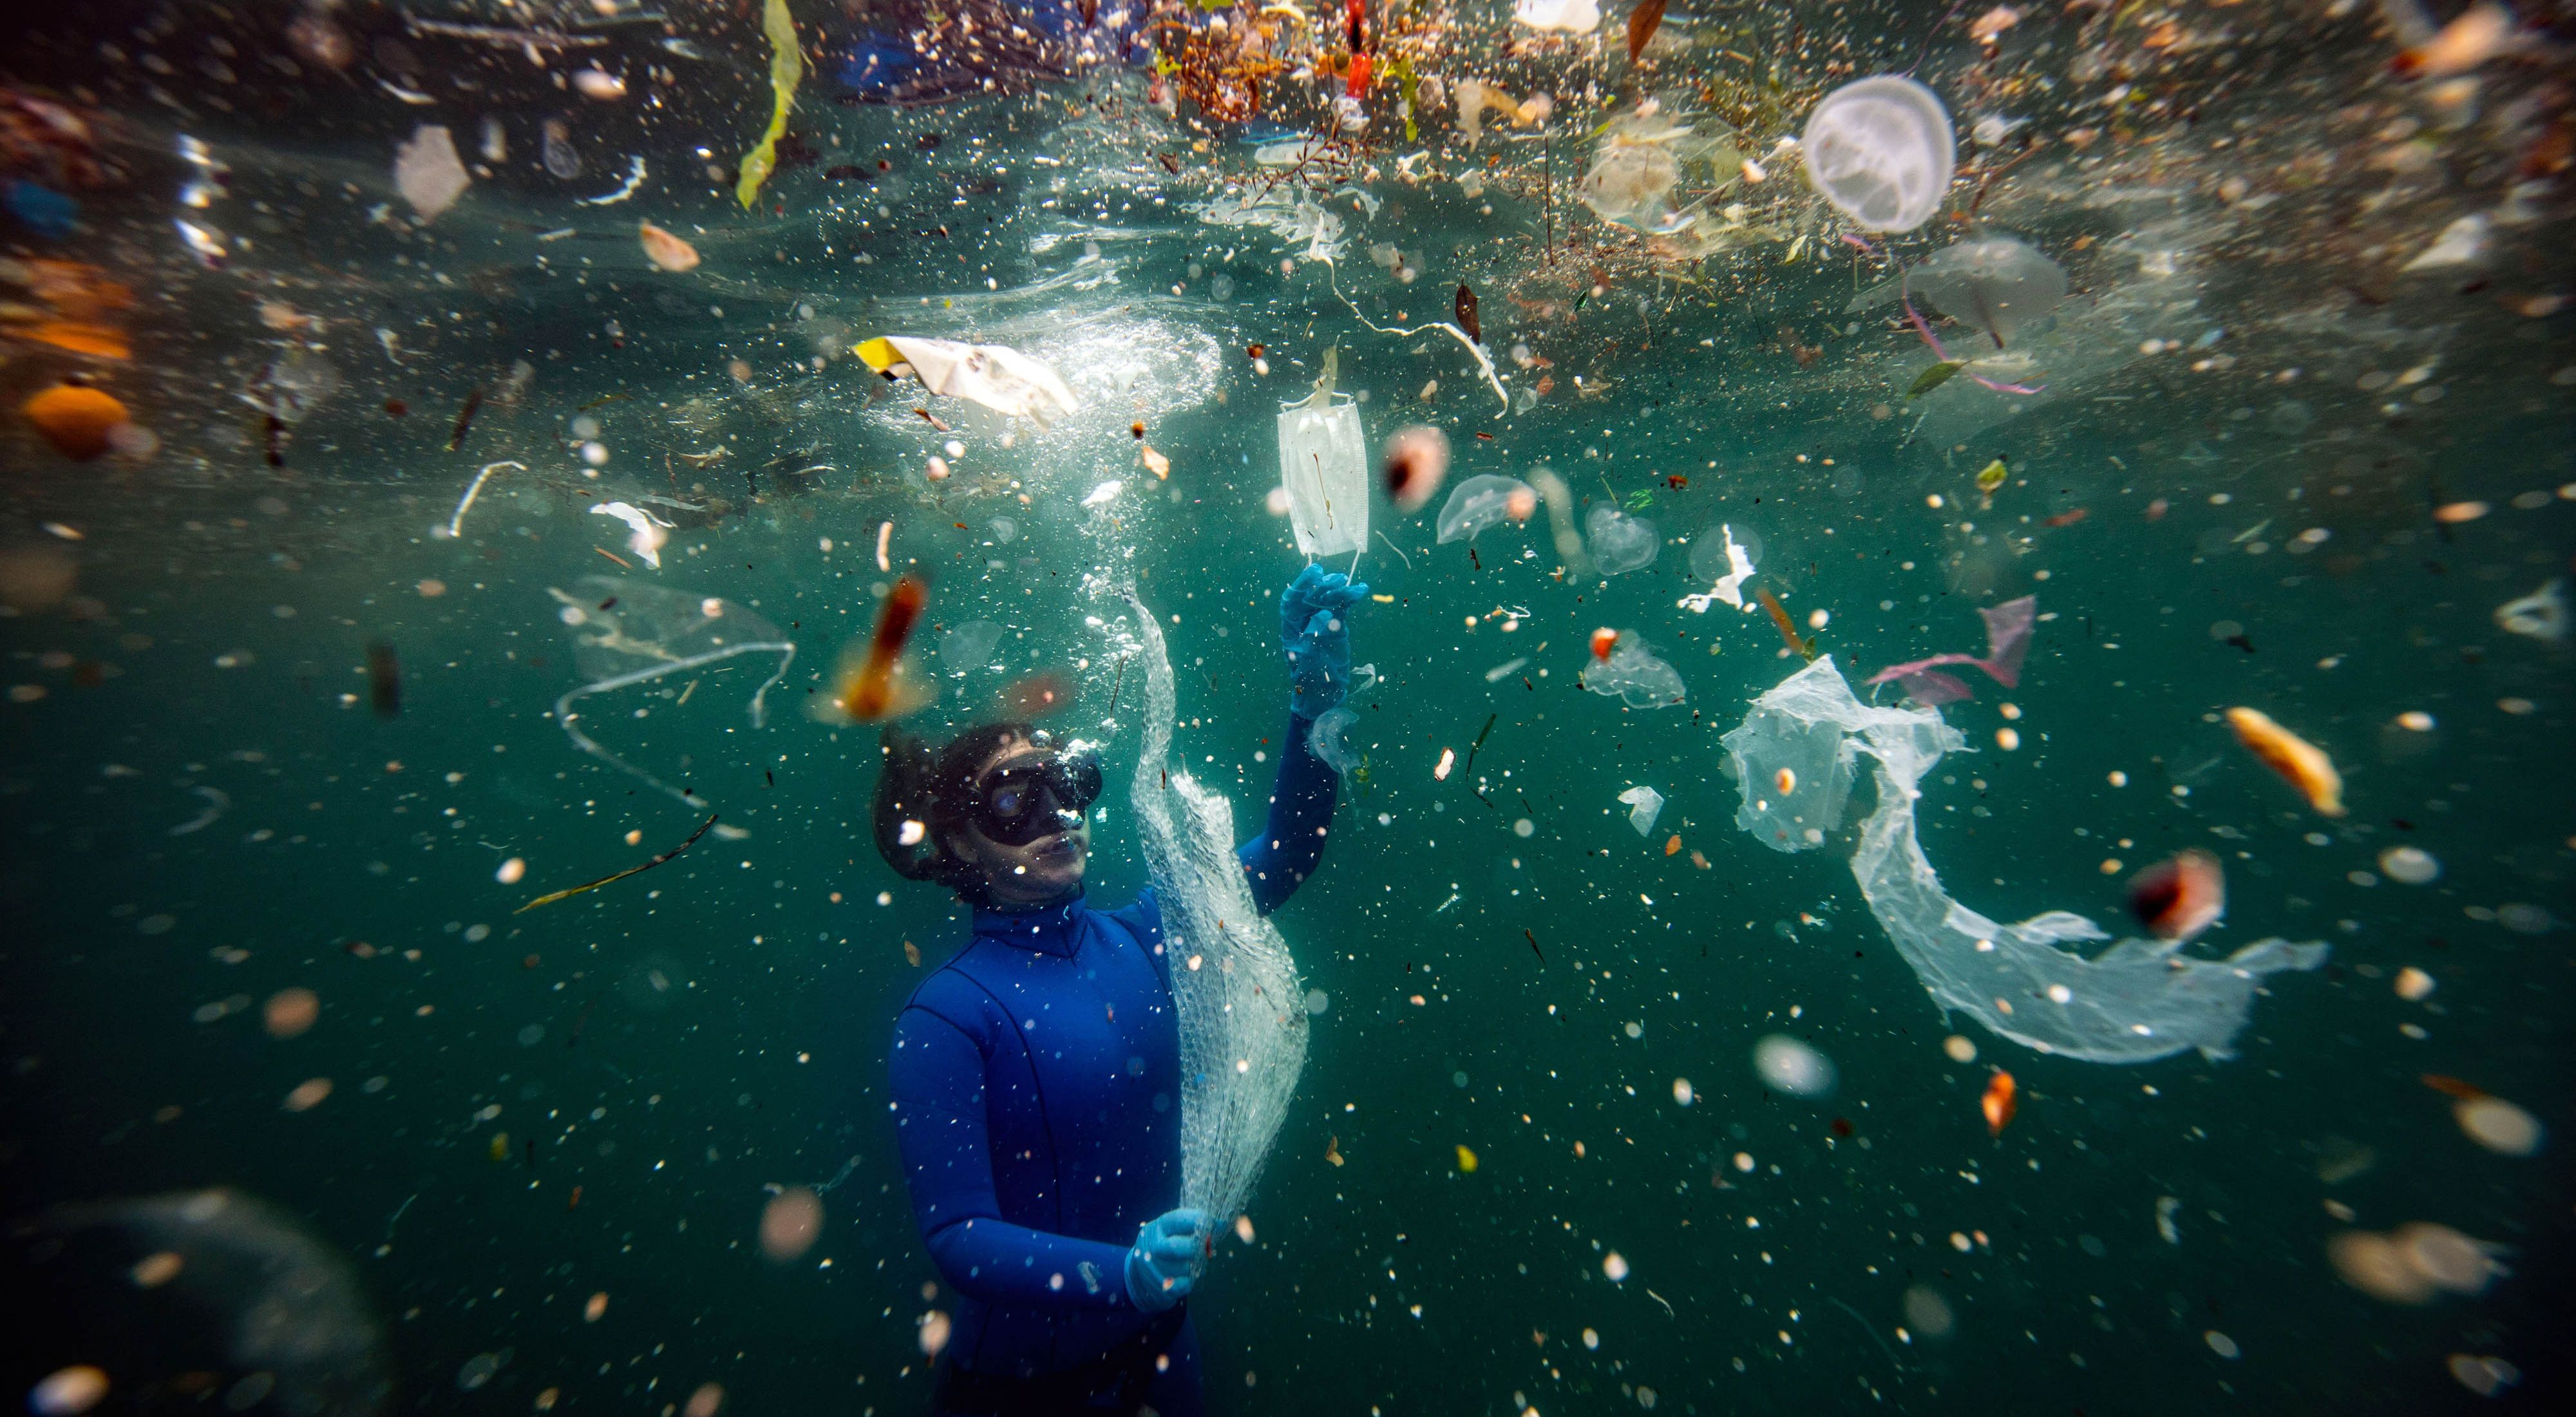 A diver swims among trash—including plastic bottles and medical masks—in the Bosporus Strait in Turkey.